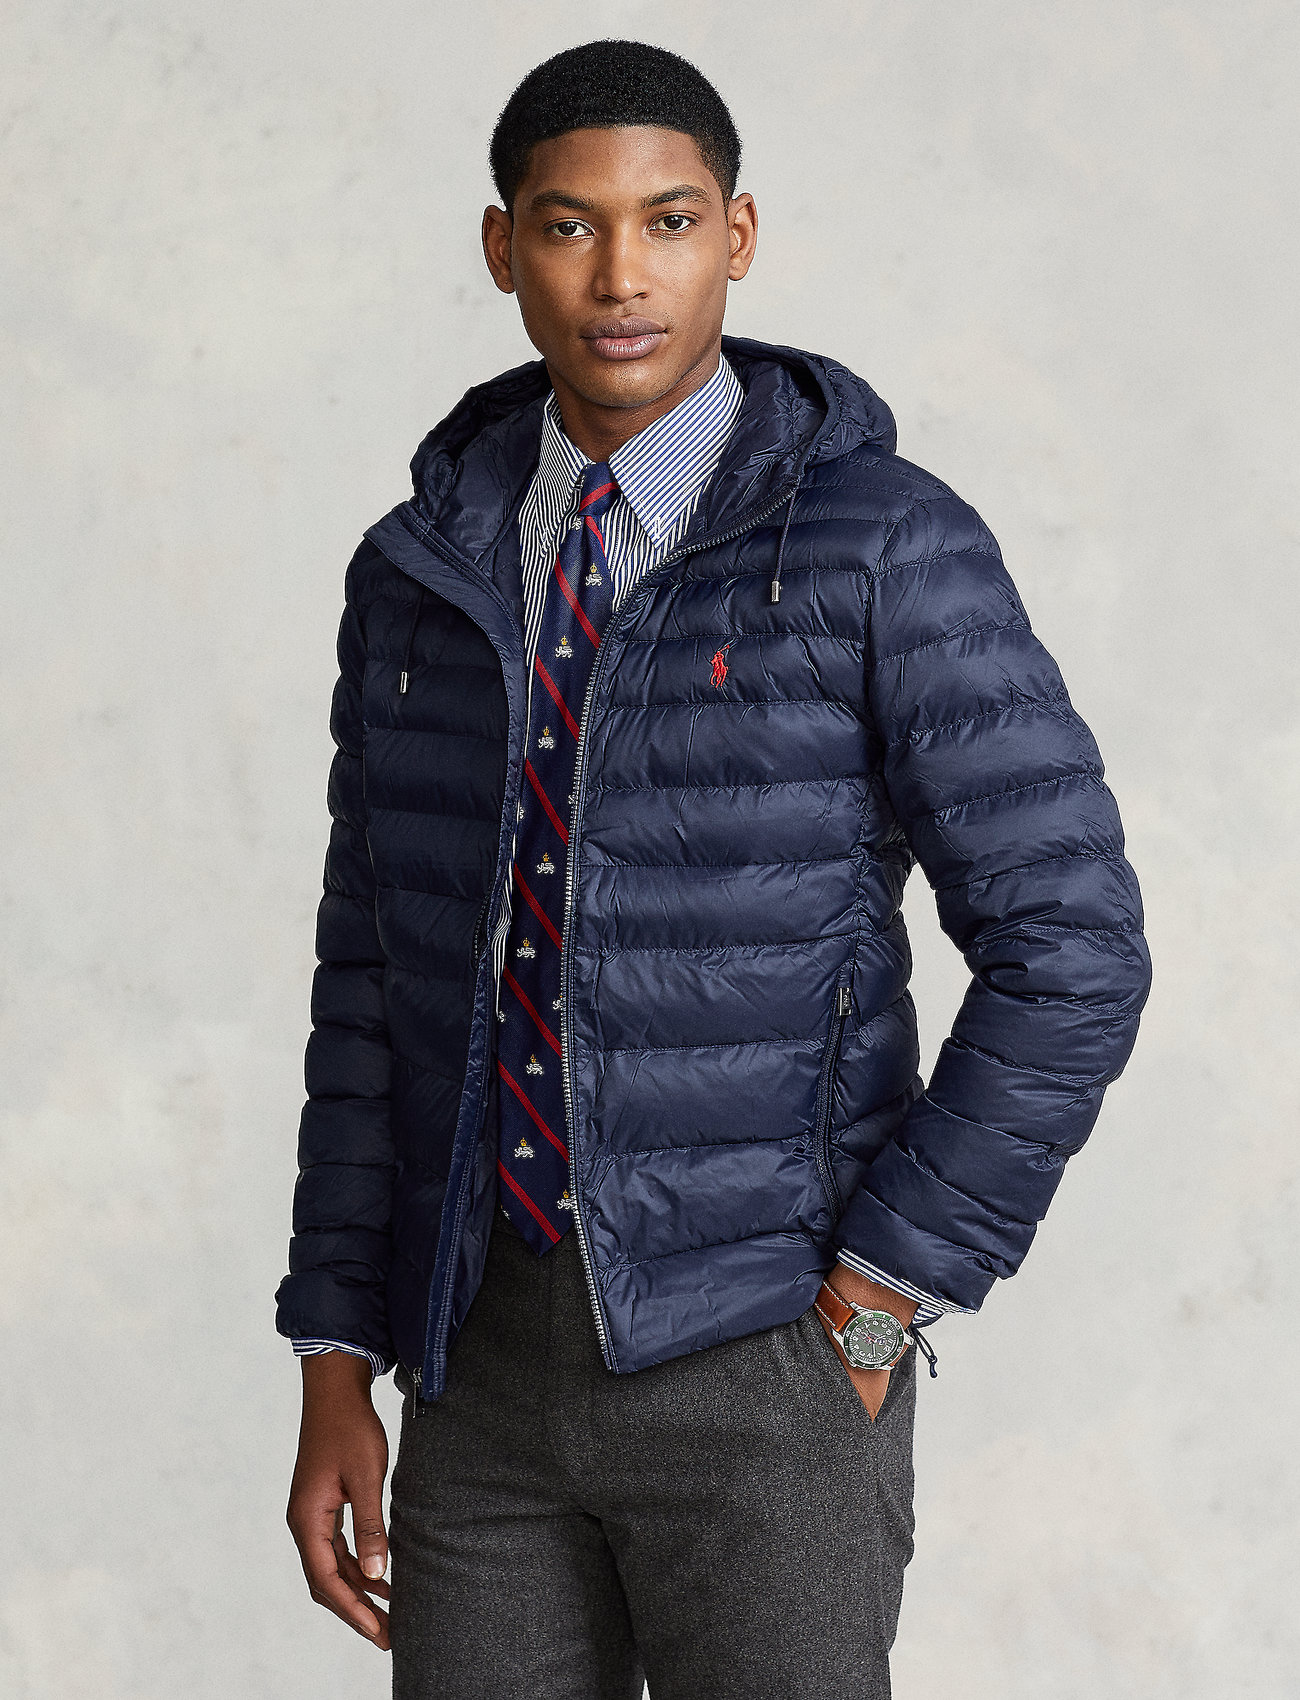 Polo Ralph Lauren The Packable Hooded Jacket  €. Buy Padded jackets  from Polo Ralph Lauren online at . Fast delivery and easy returns